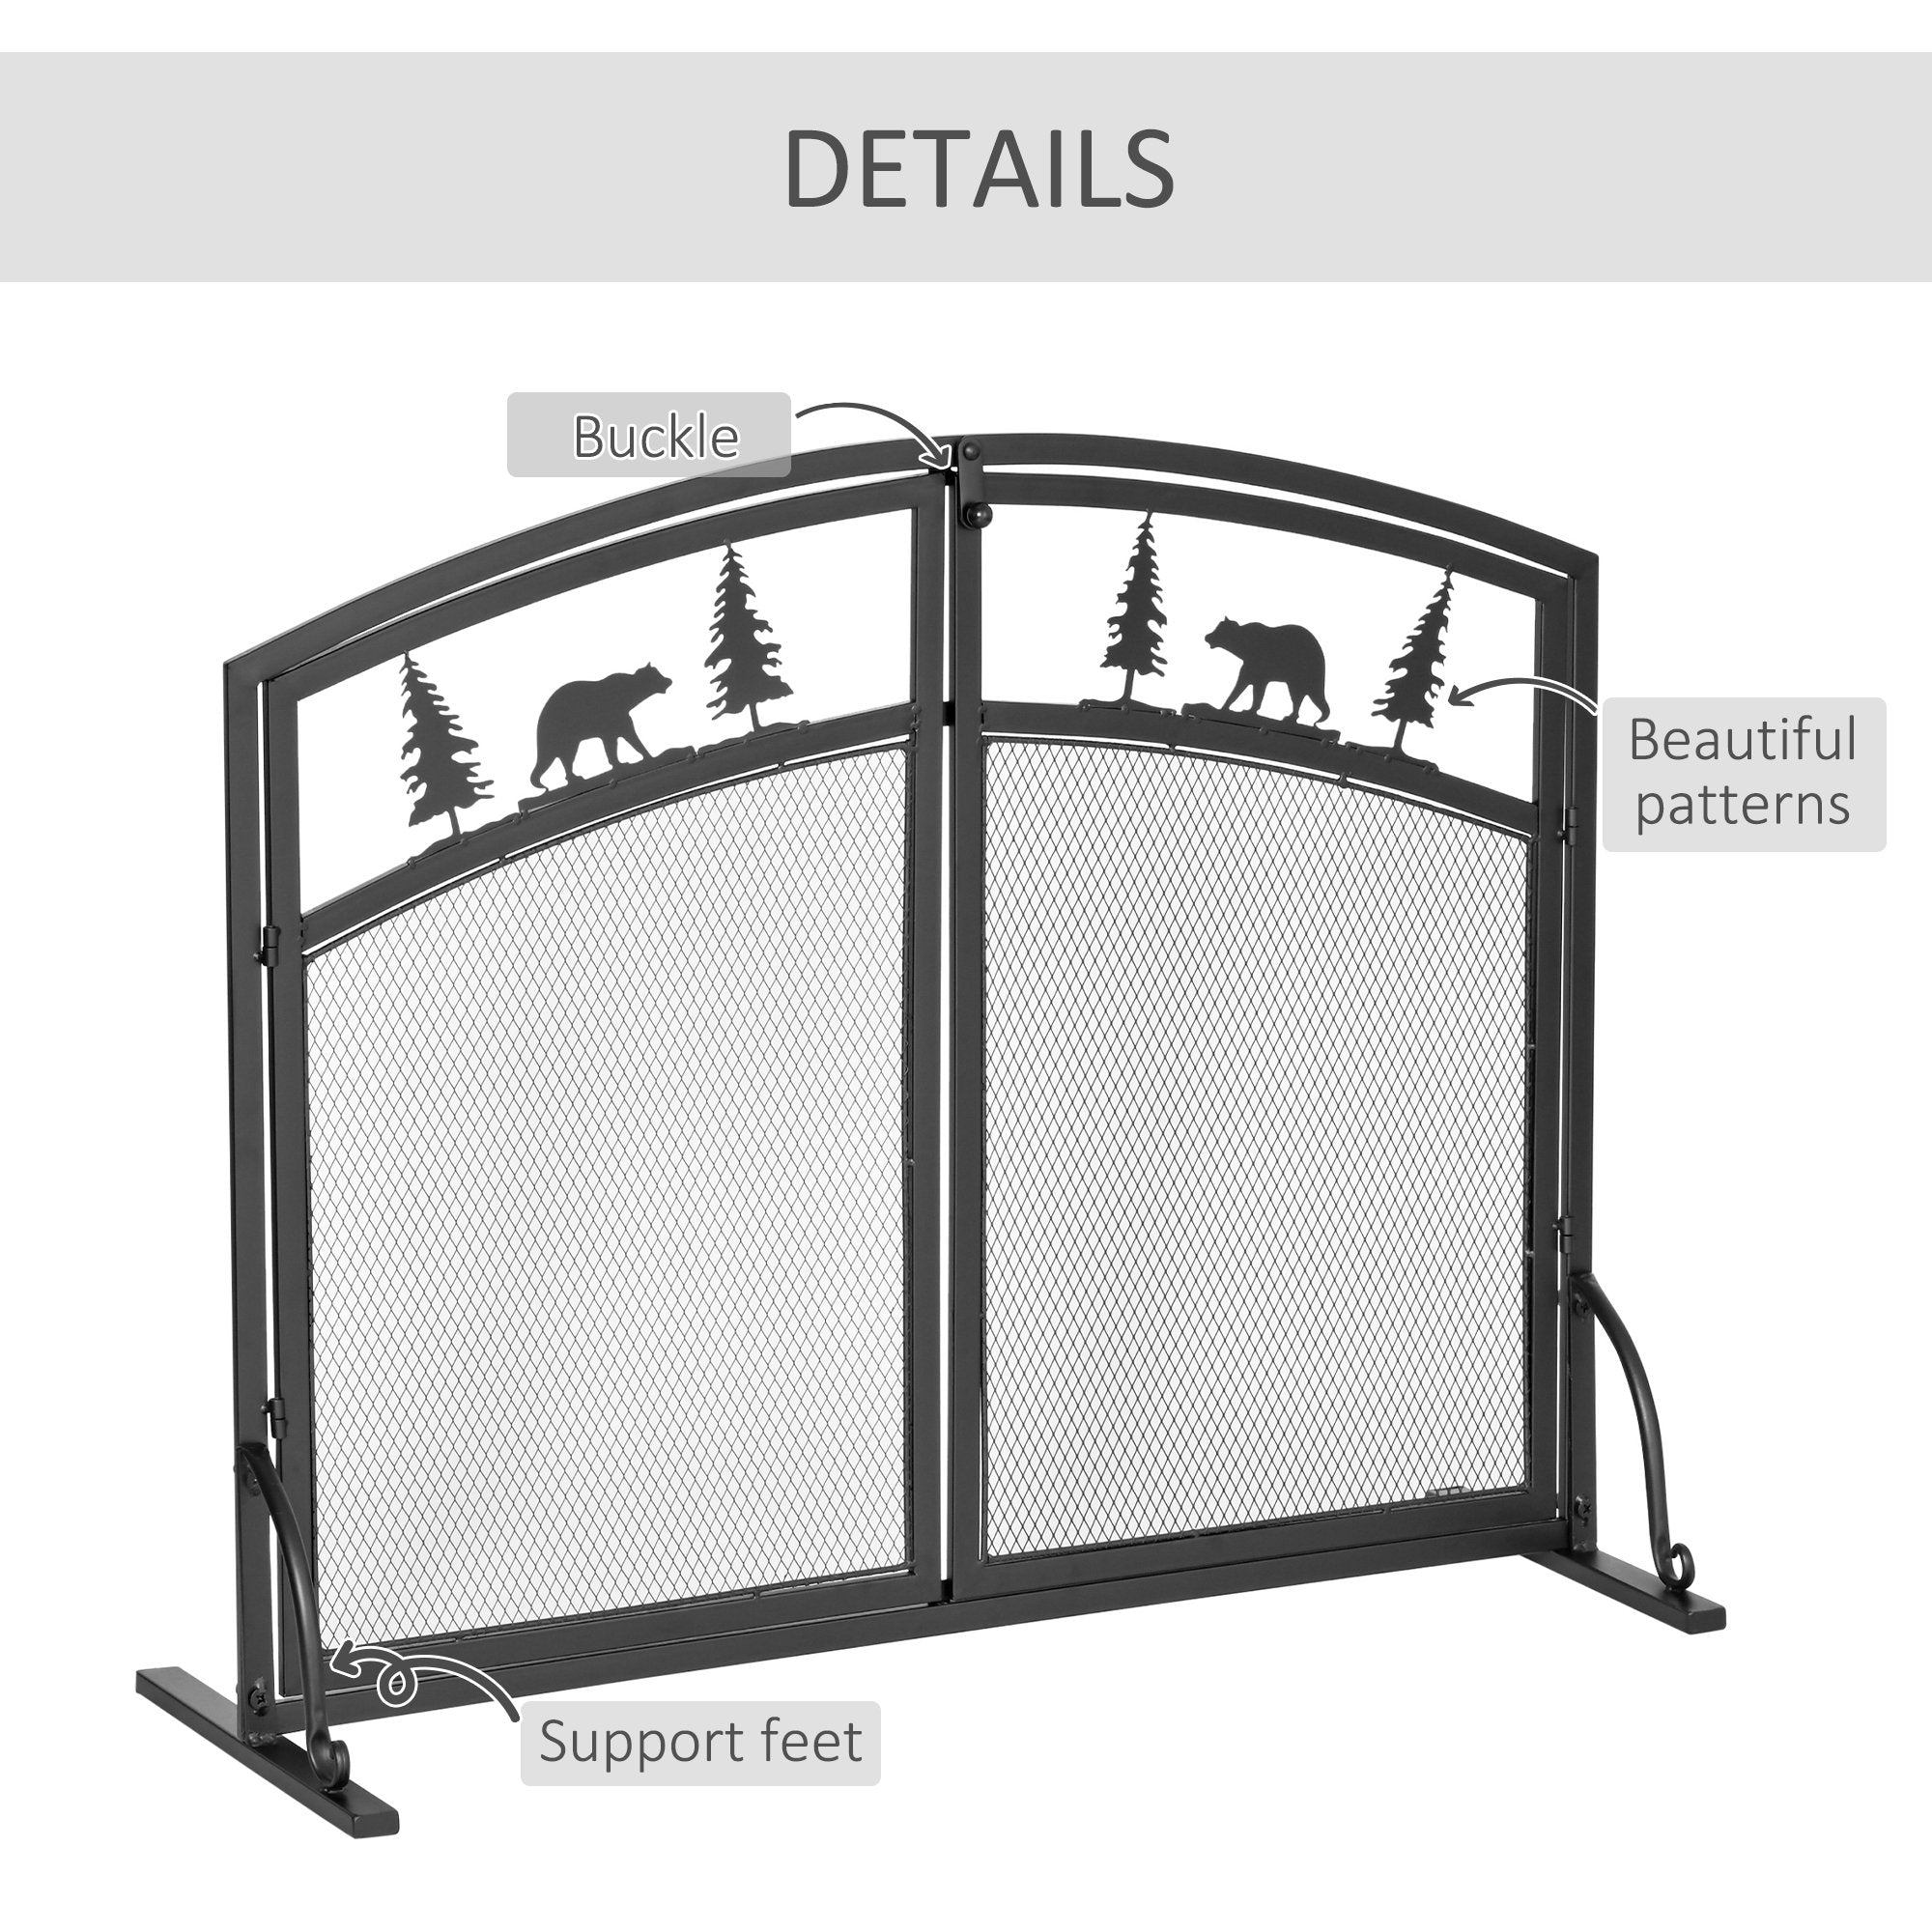 HOMCOM Fire Guard with Double Doors, Metal Mesh Fireplace Screen, Spark Flame Barrier with Tree Decoration for Living Room, Bedroom Decor - Inspirely